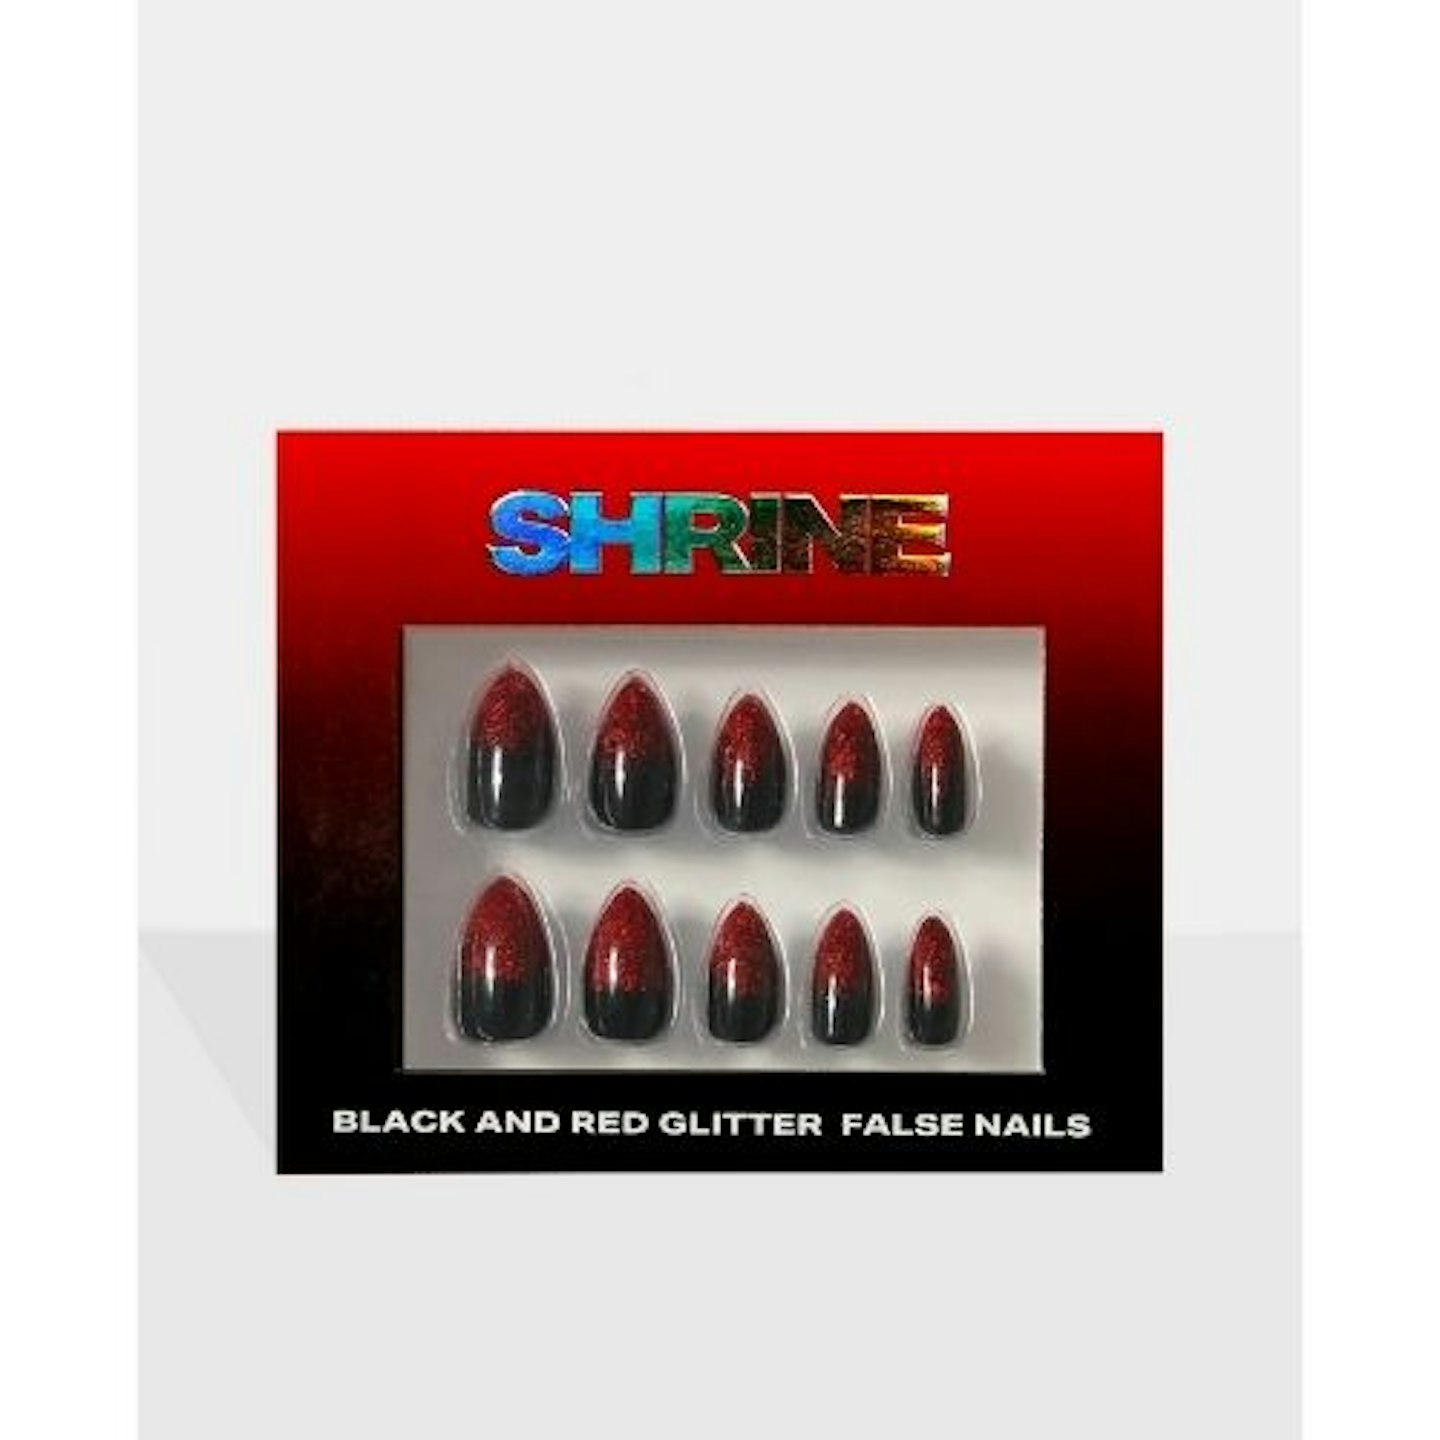 Black and Red Glitter False Nails